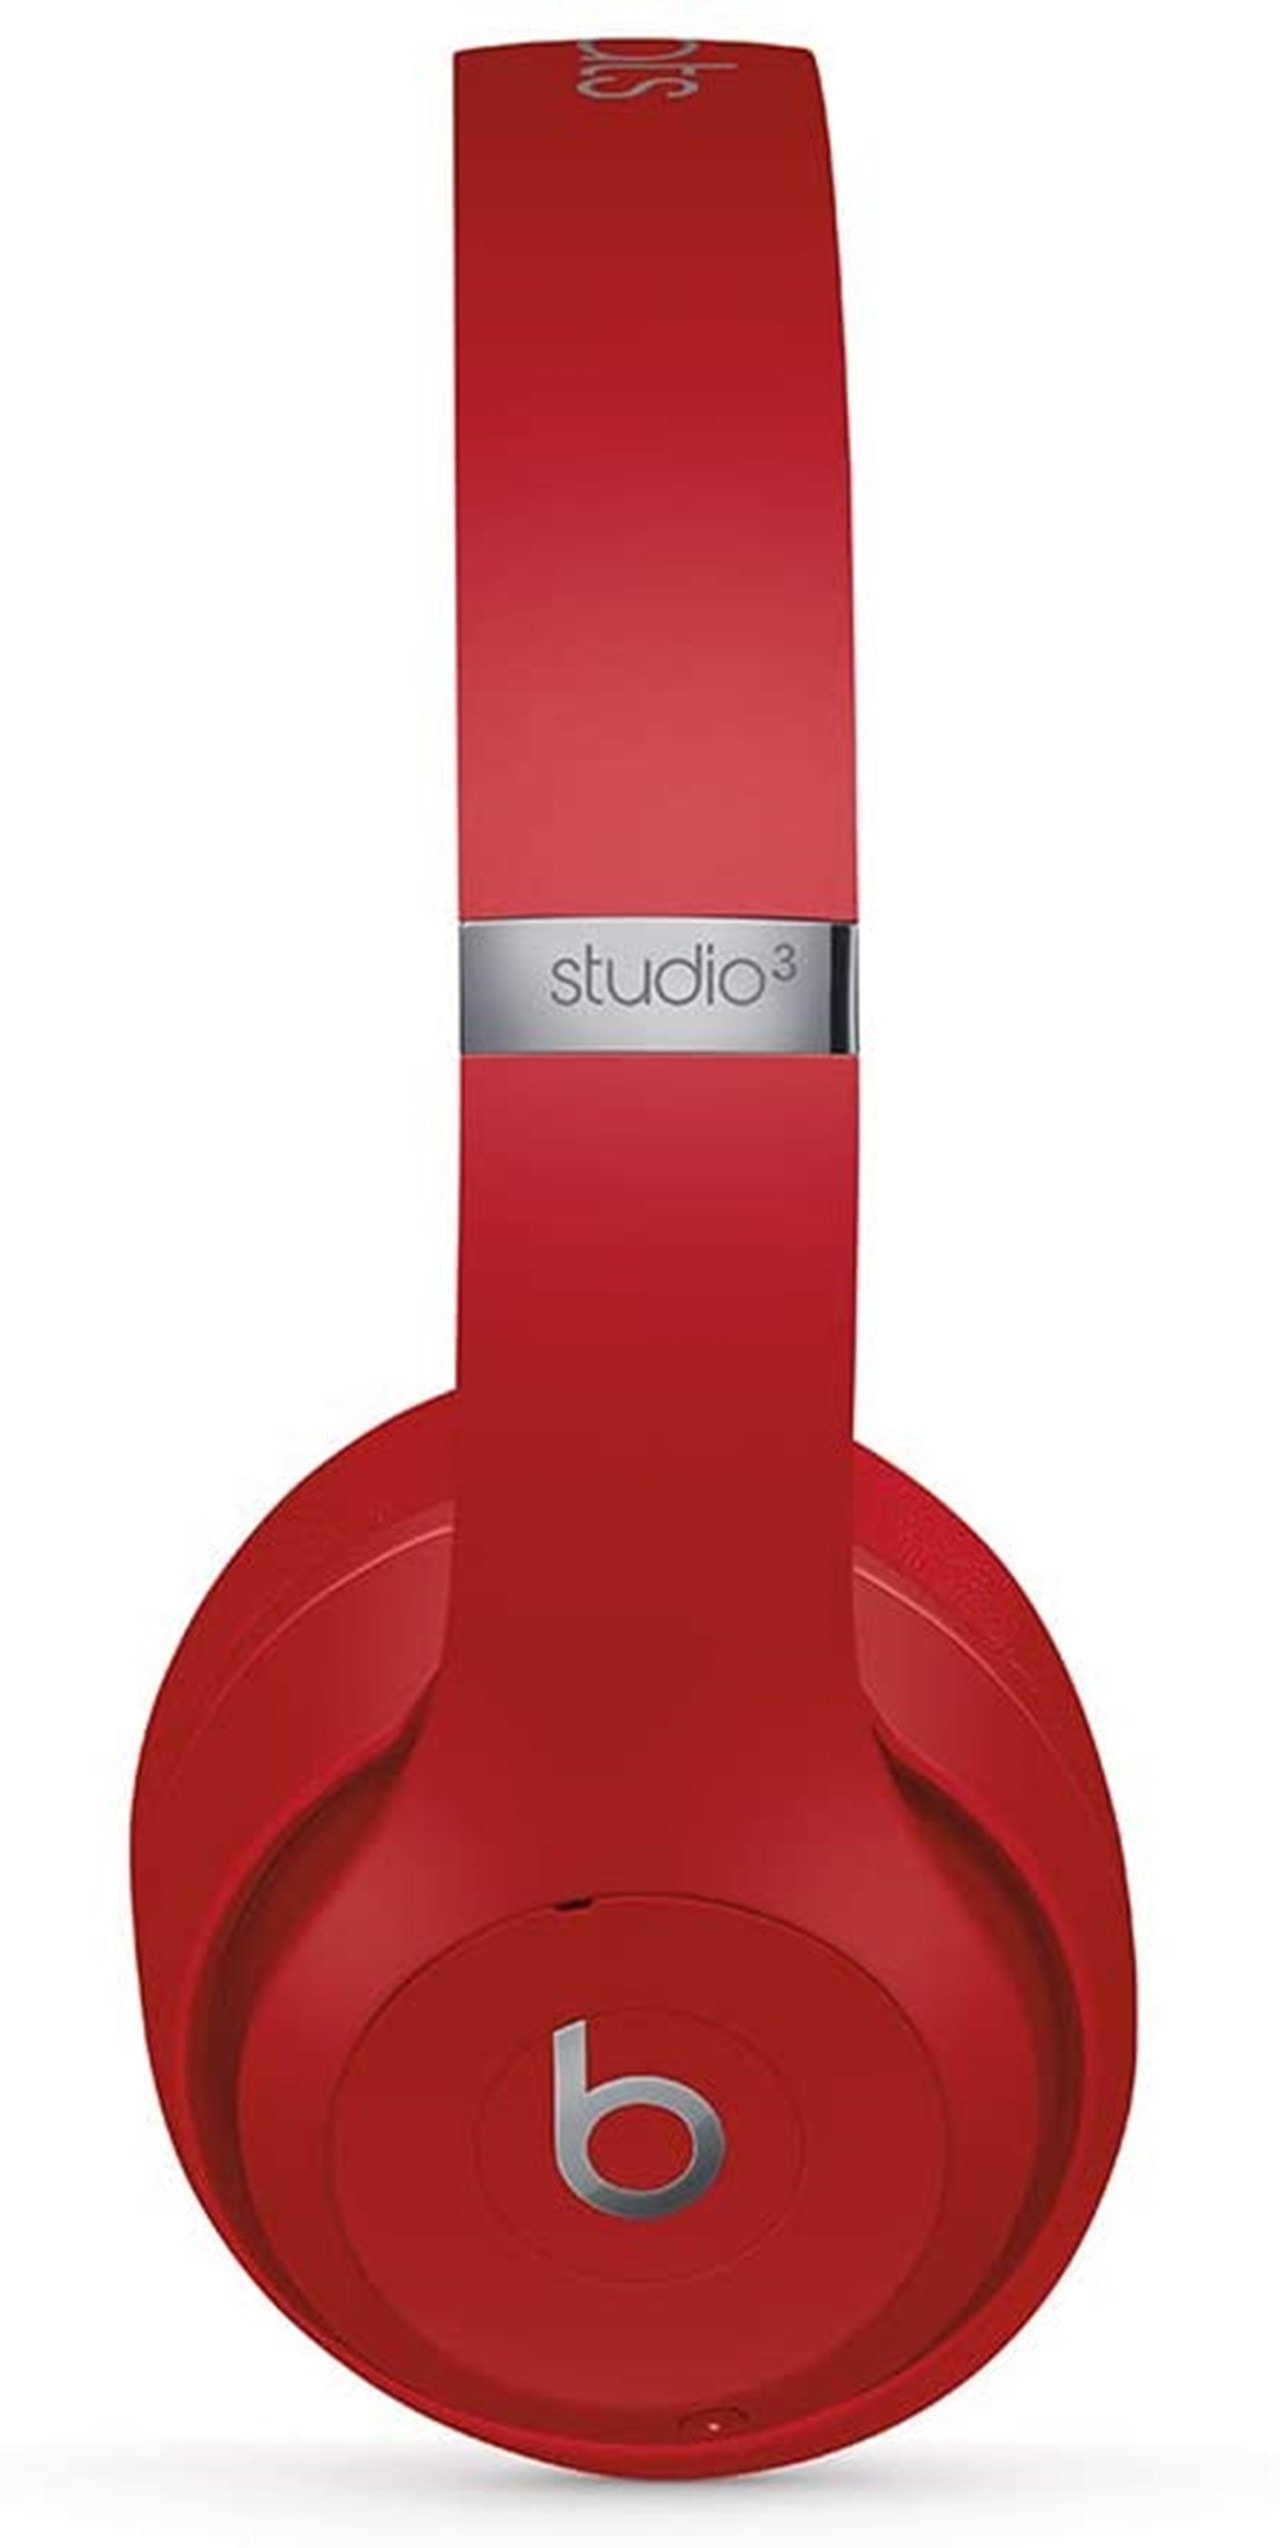 beats by dre studio 3 red